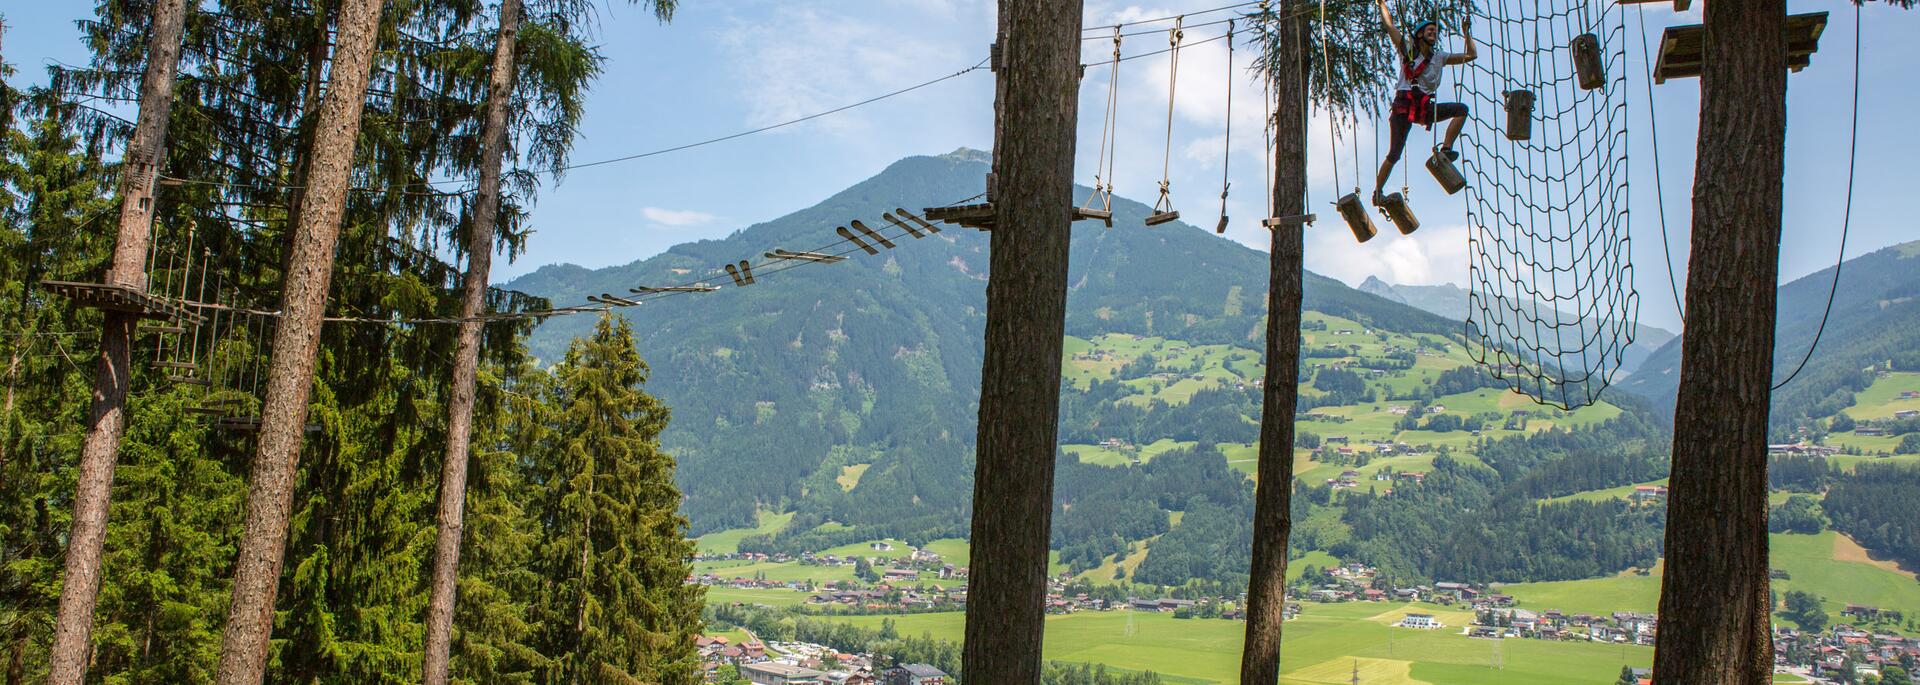 high ropes course Kaltenbach family holiday in Zillertal